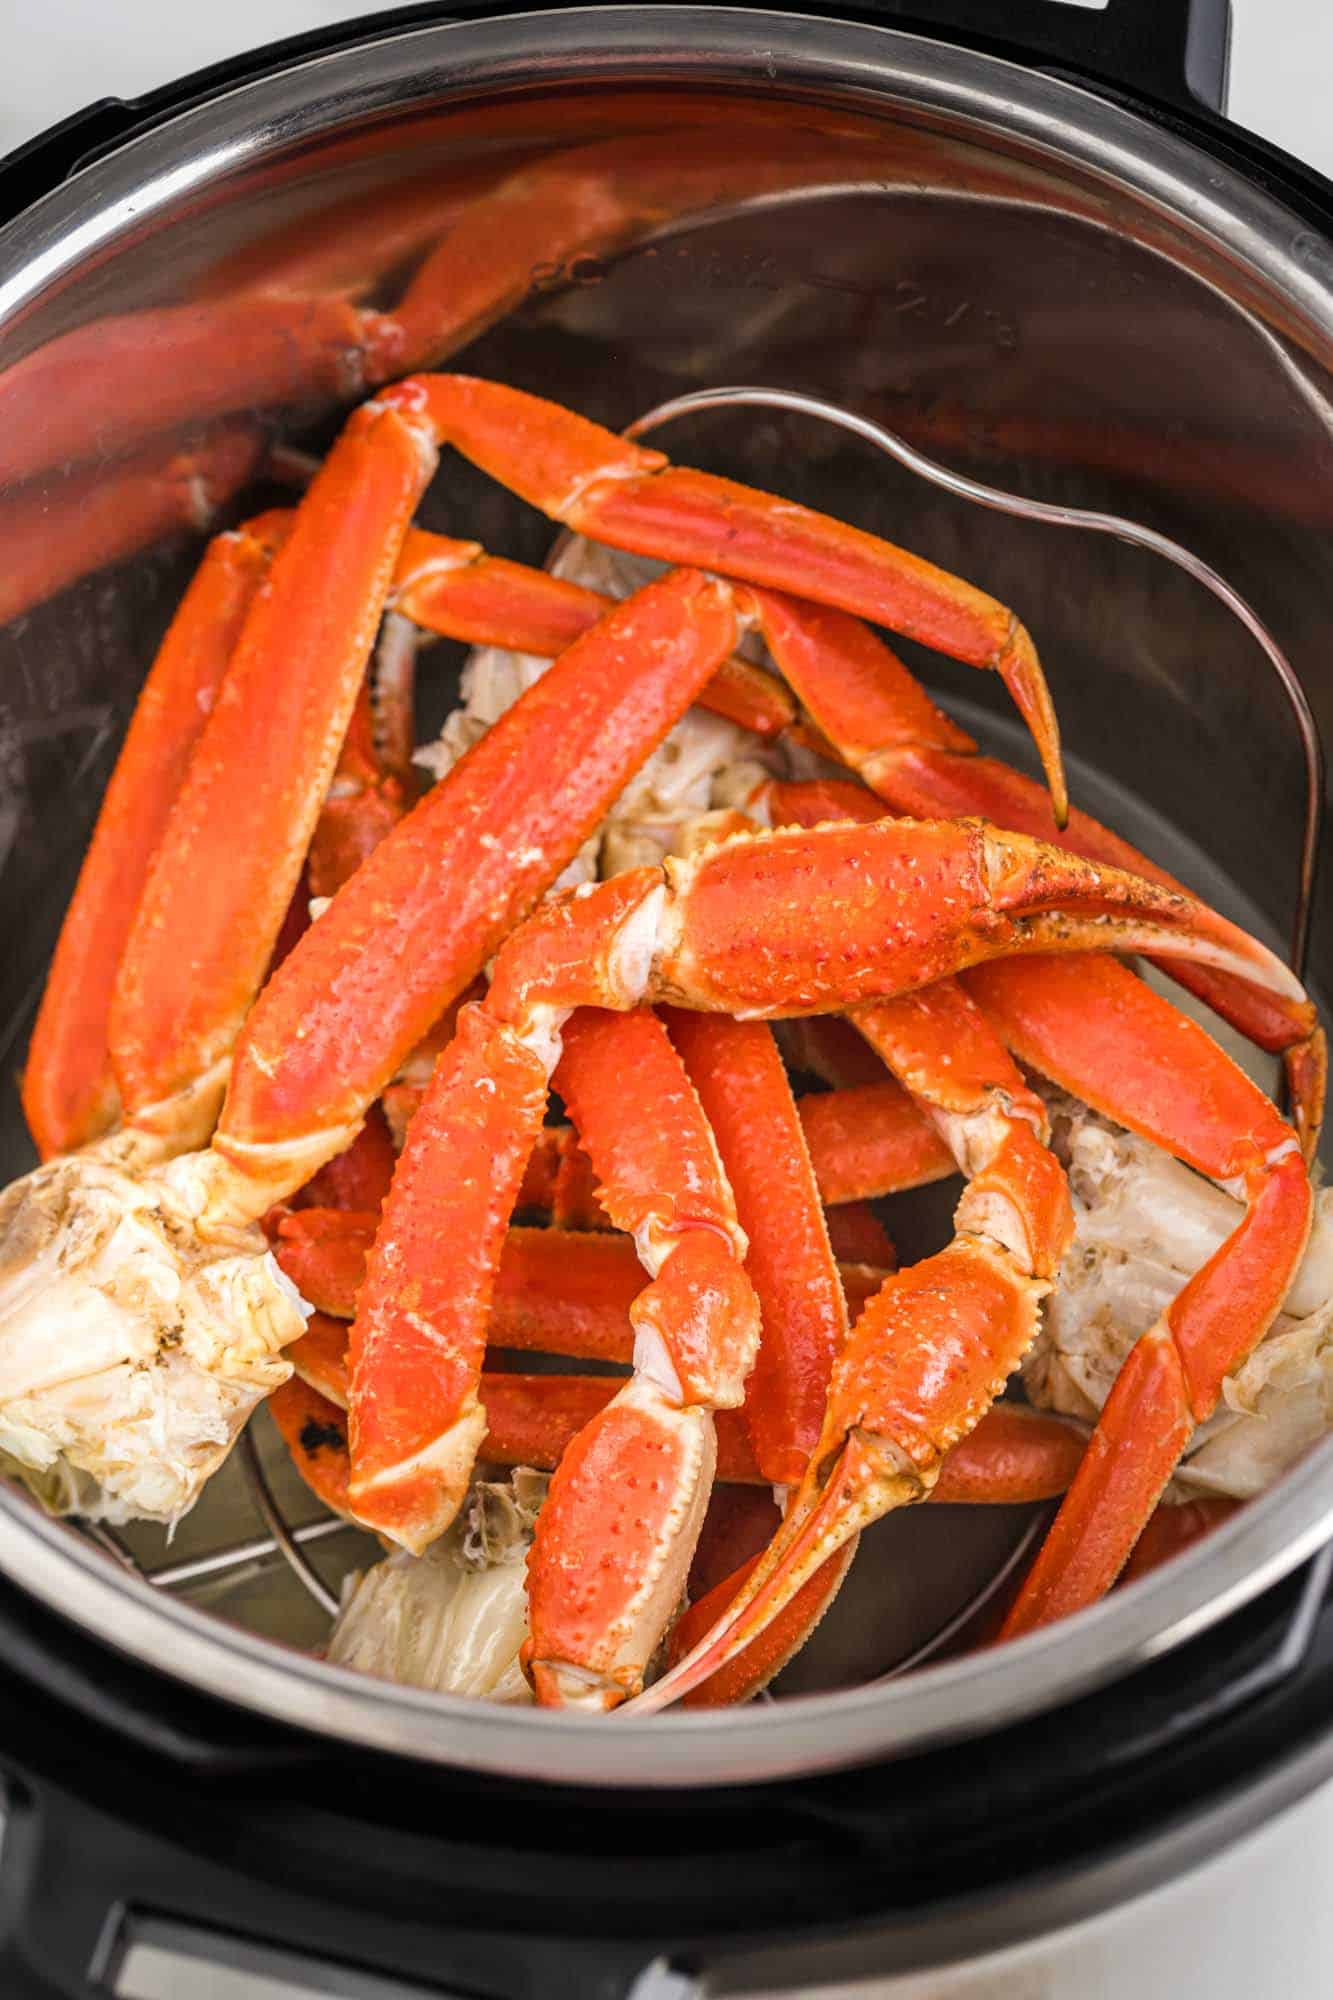 Fully cooked crab legs in the instant pot placed on a trivet